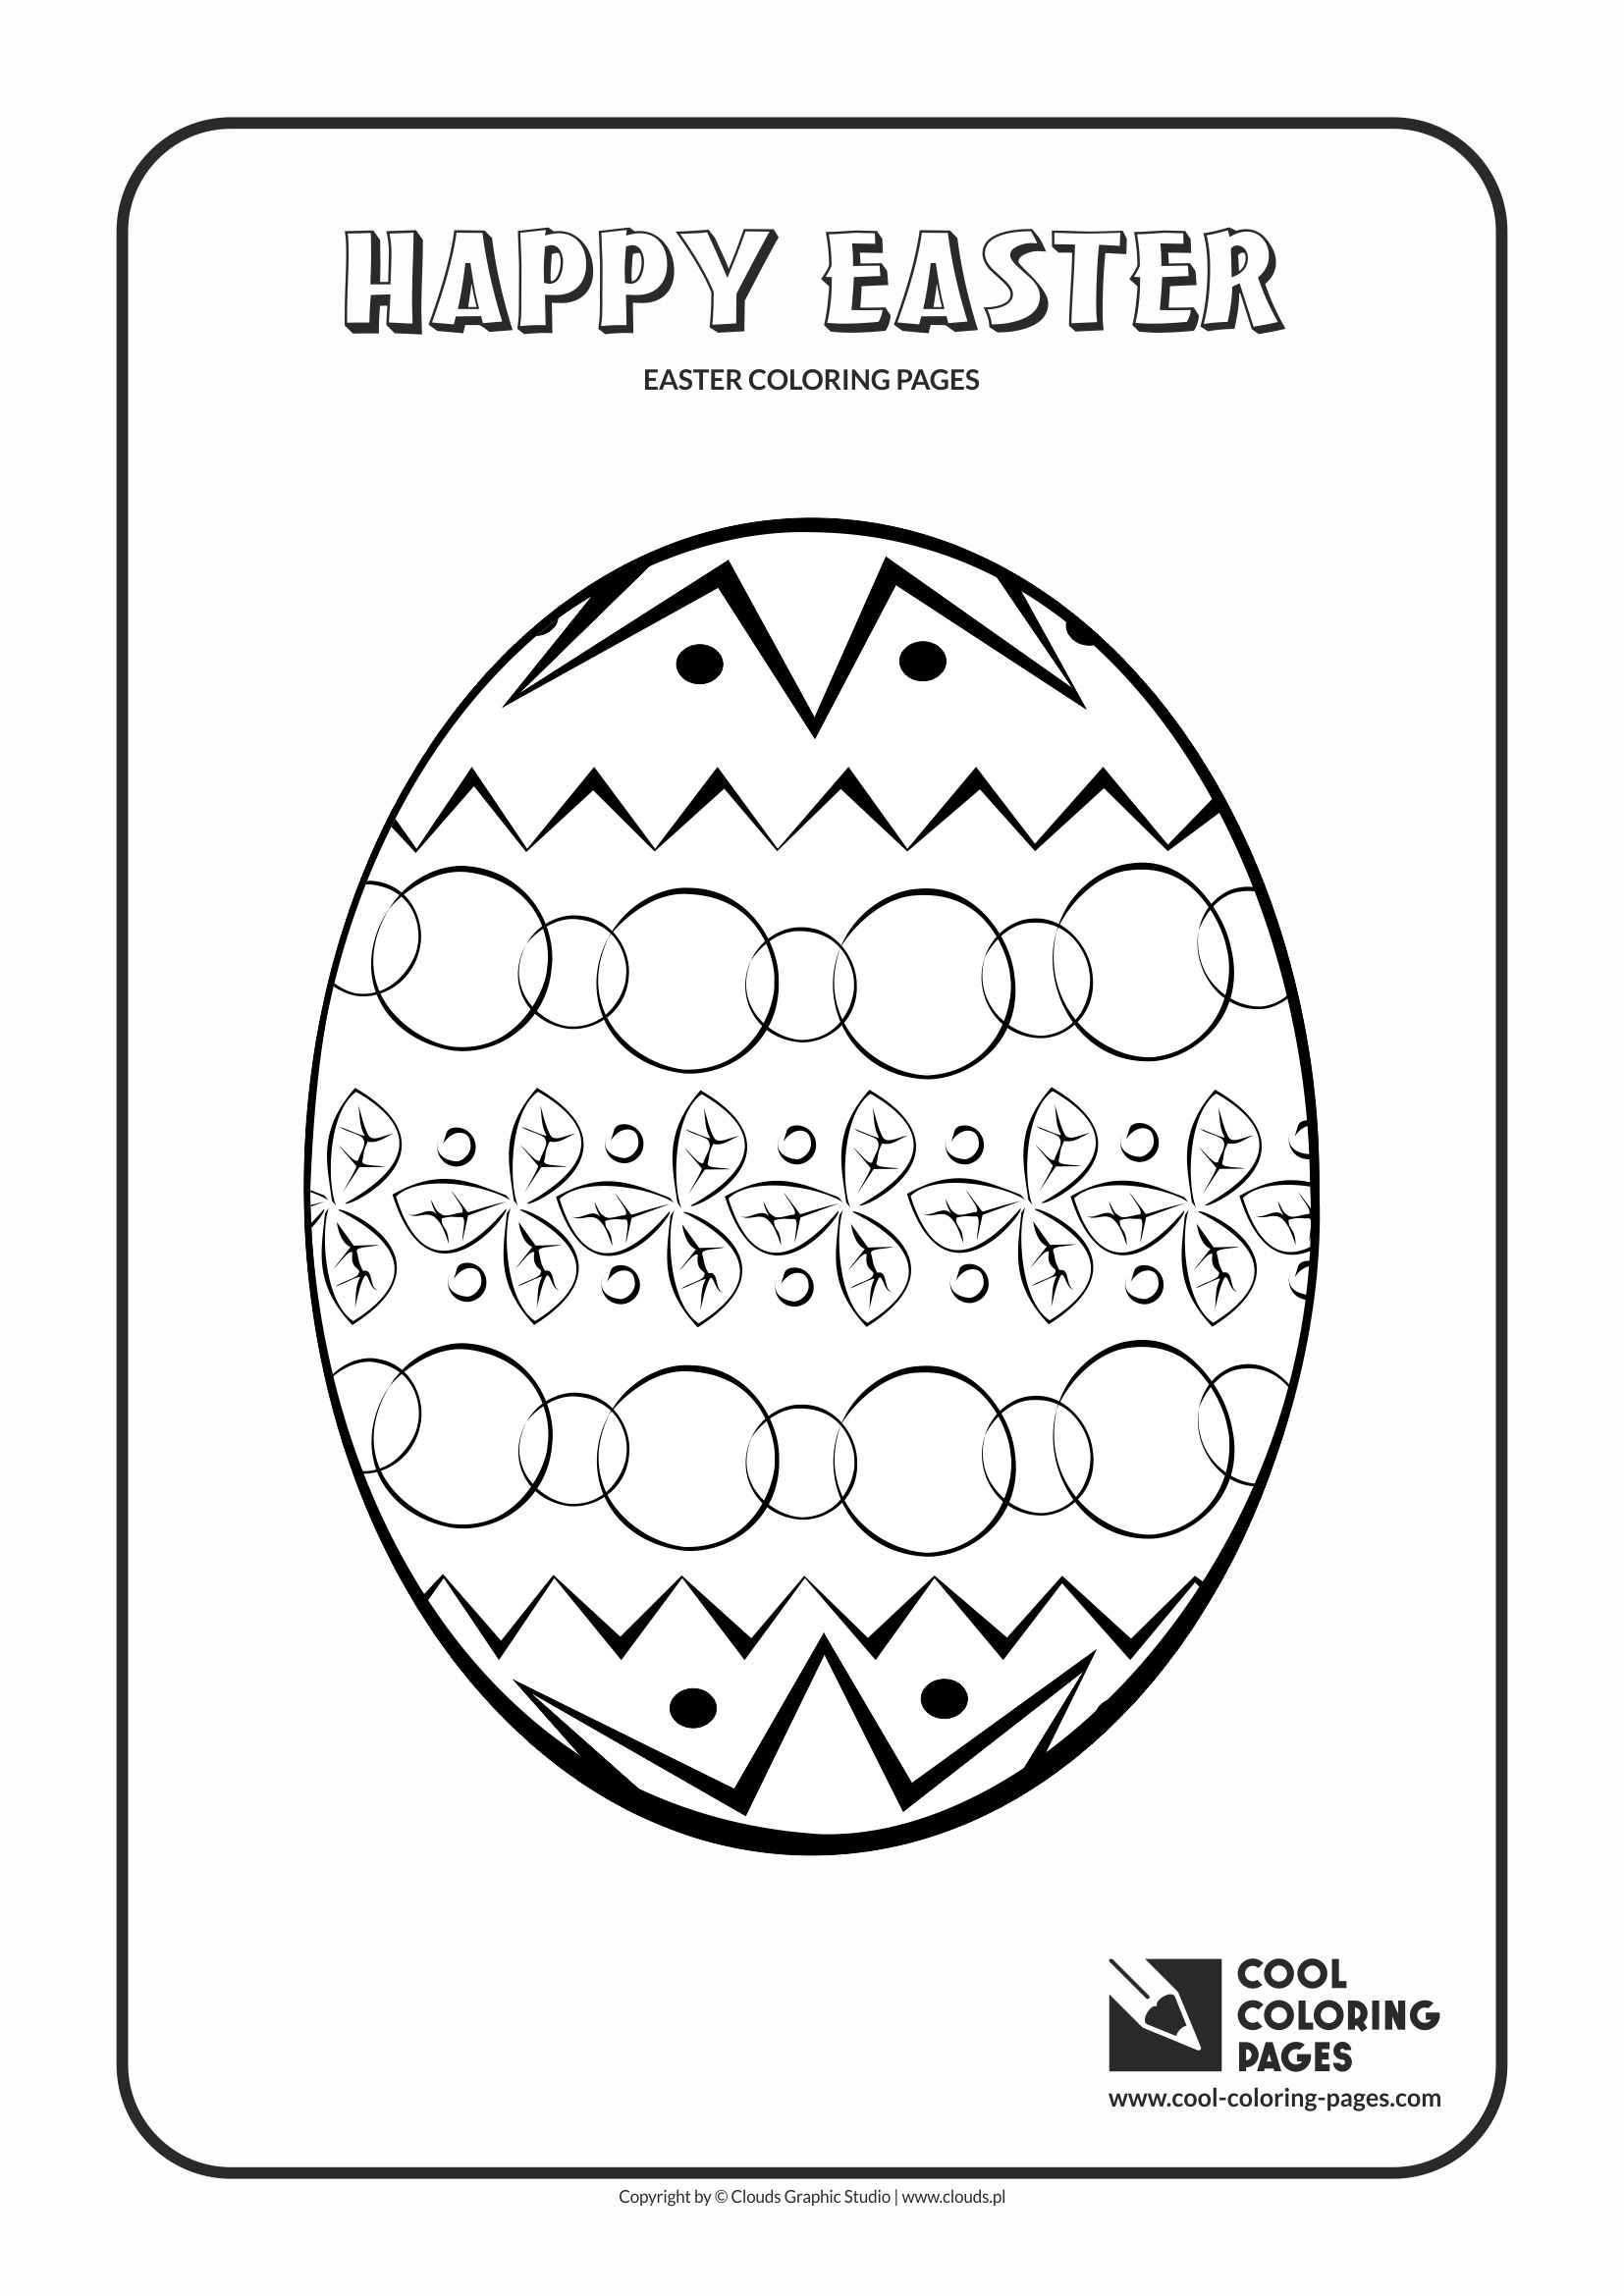 Cool Coloring Pages - Holidays / Easter egg no 2 / Coloring page with Easter egg no 2